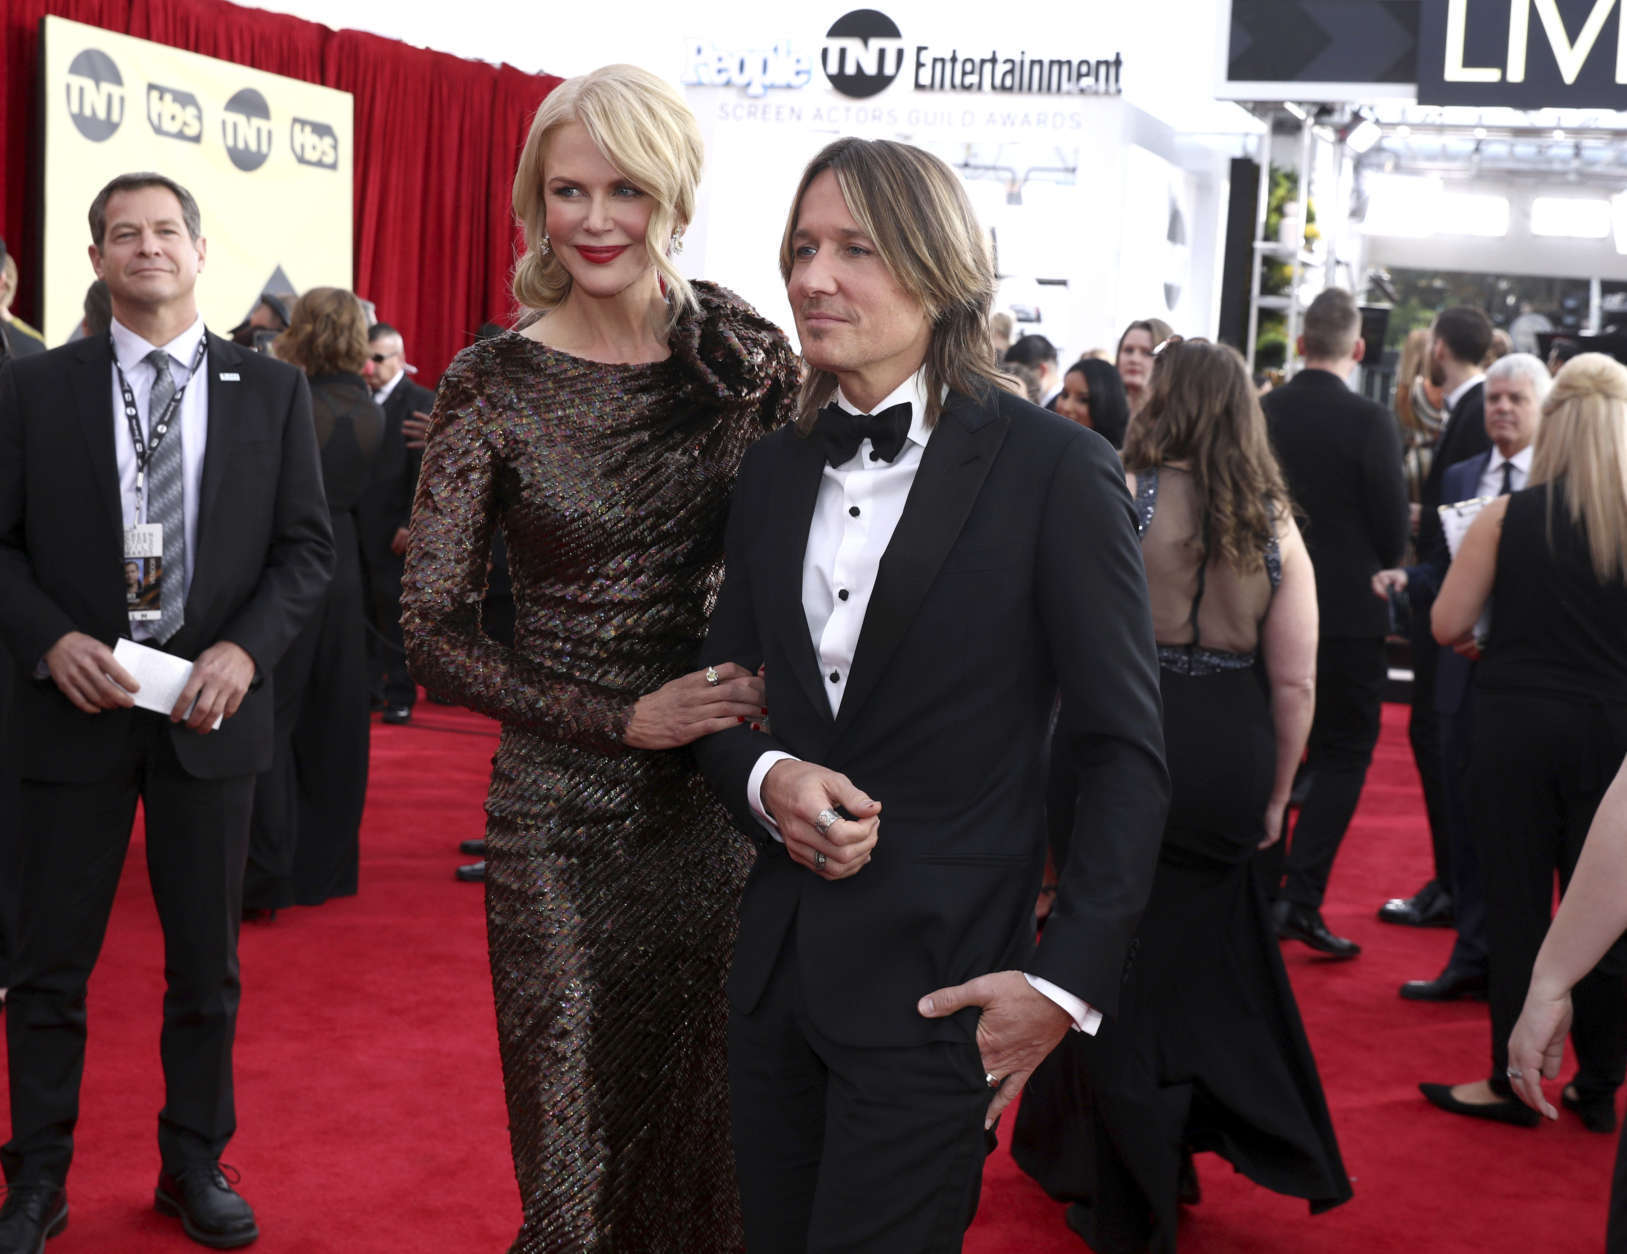 Nicole Kidman, left, and Keith Urban arrive at the 24th annual Screen Actors Guild Awards at the Shrine Auditorium &amp; Expo Hall on Sunday, Jan. 21, 2018, in Los Angeles. (Photo by Matt Sayles/Invision/AP)